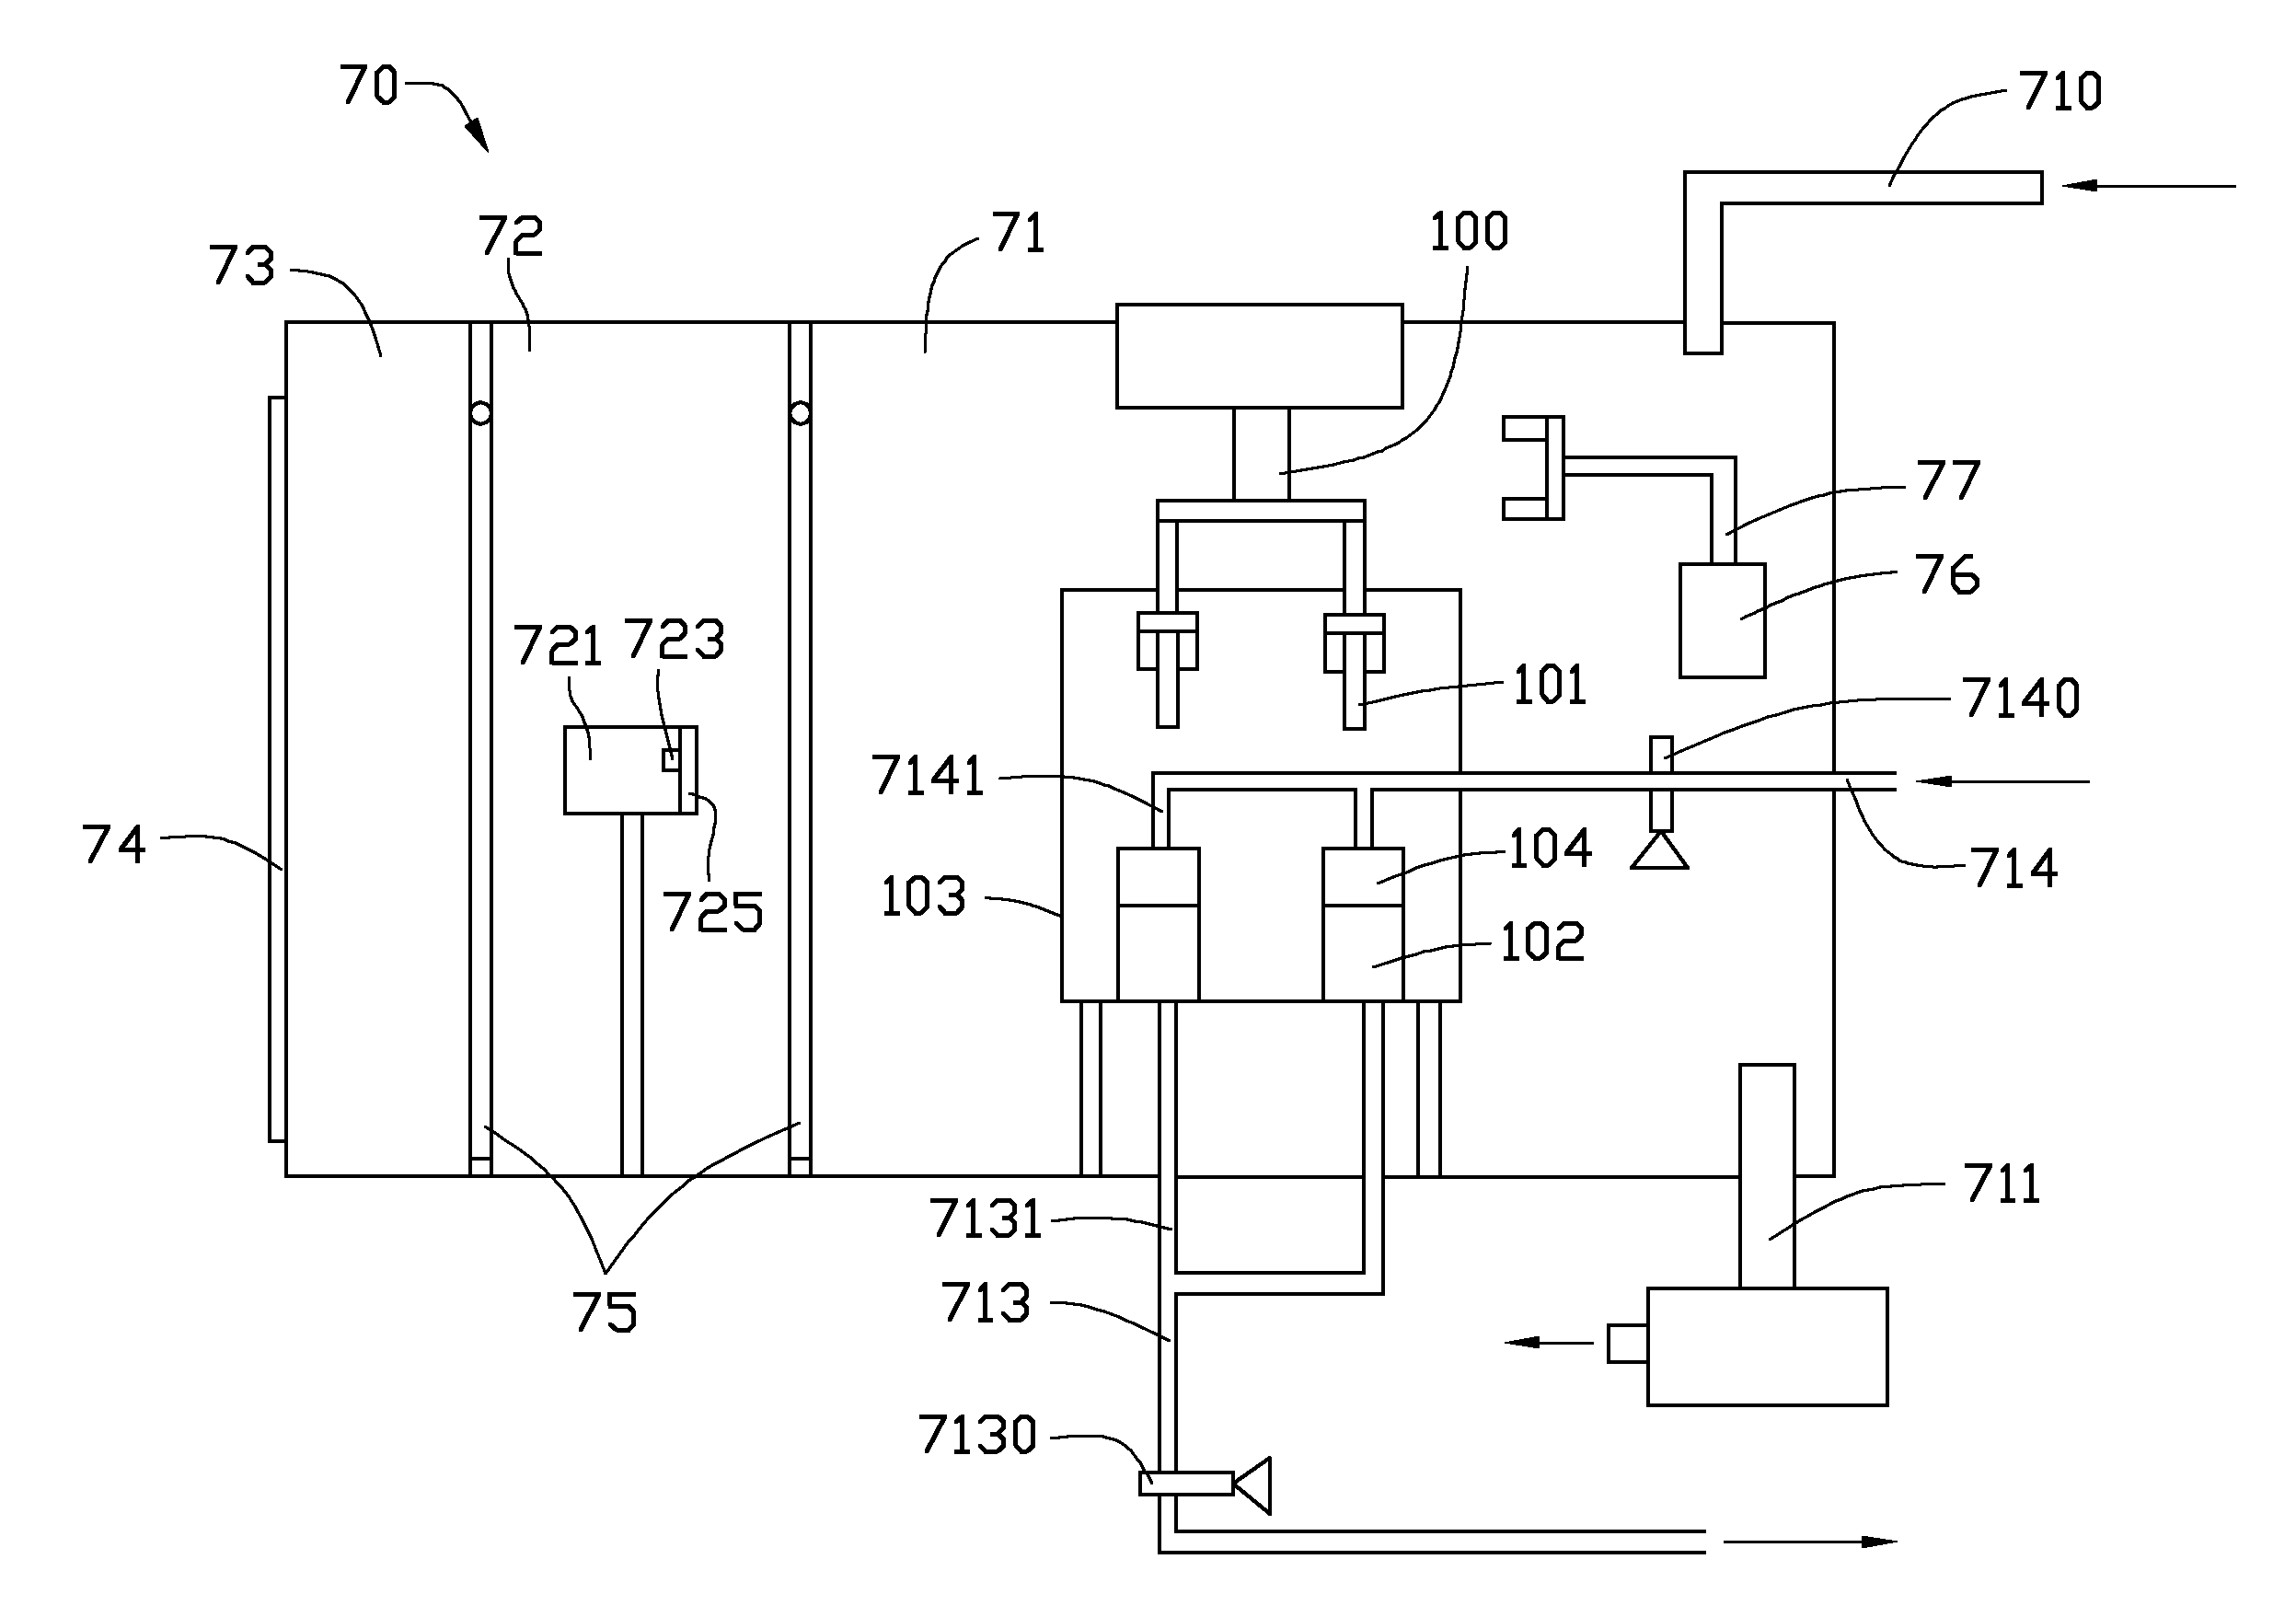 Wet coating system having annealing chamber